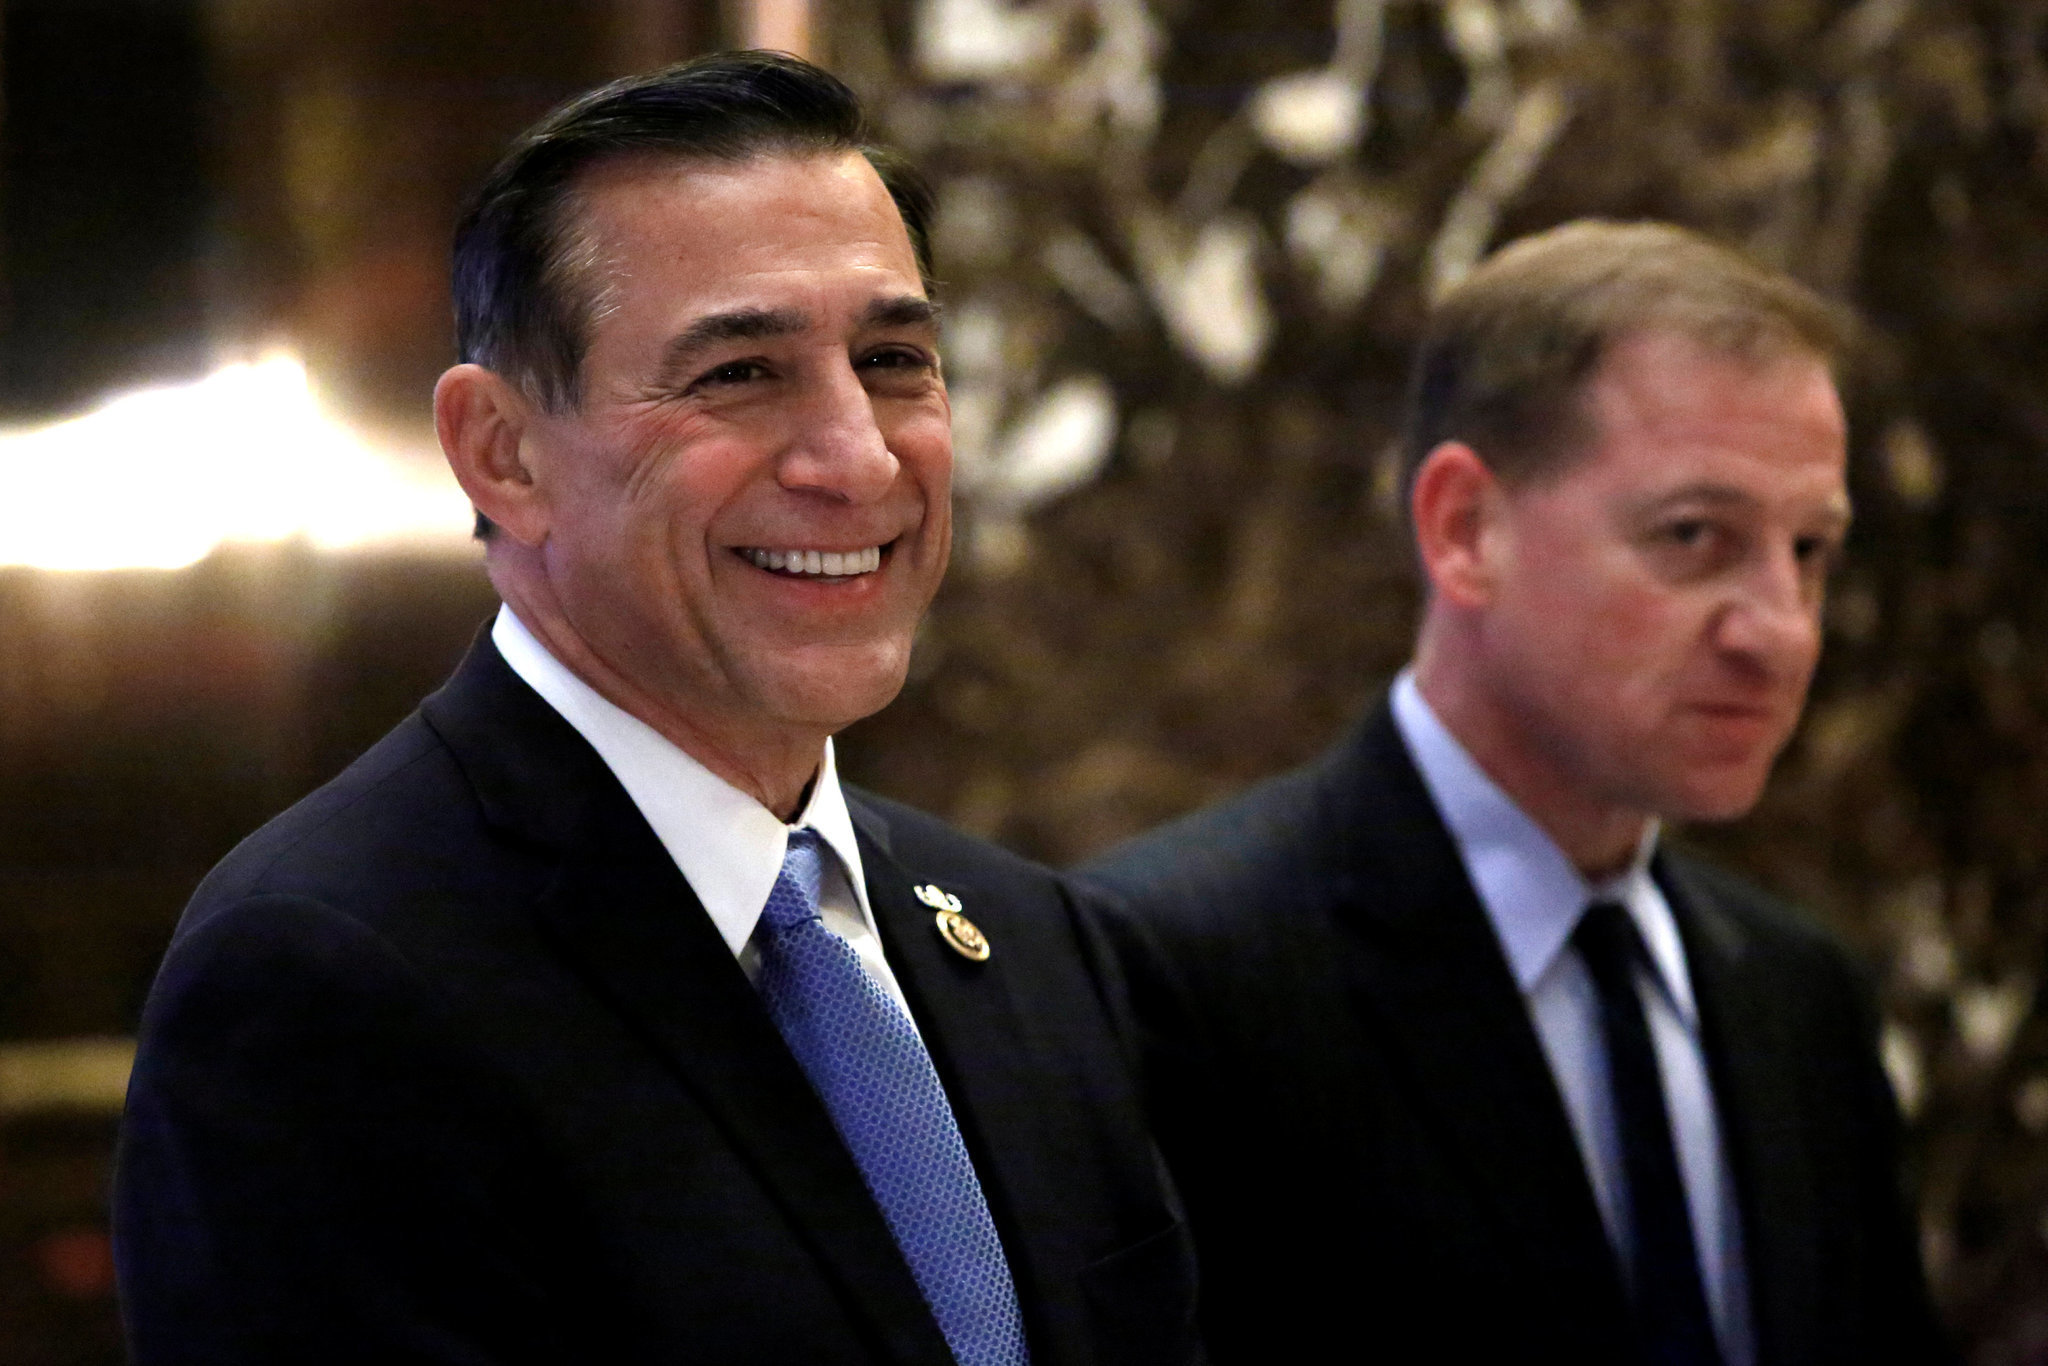 Issa votes down requiring Justice Department to turn over Trump investigation documents